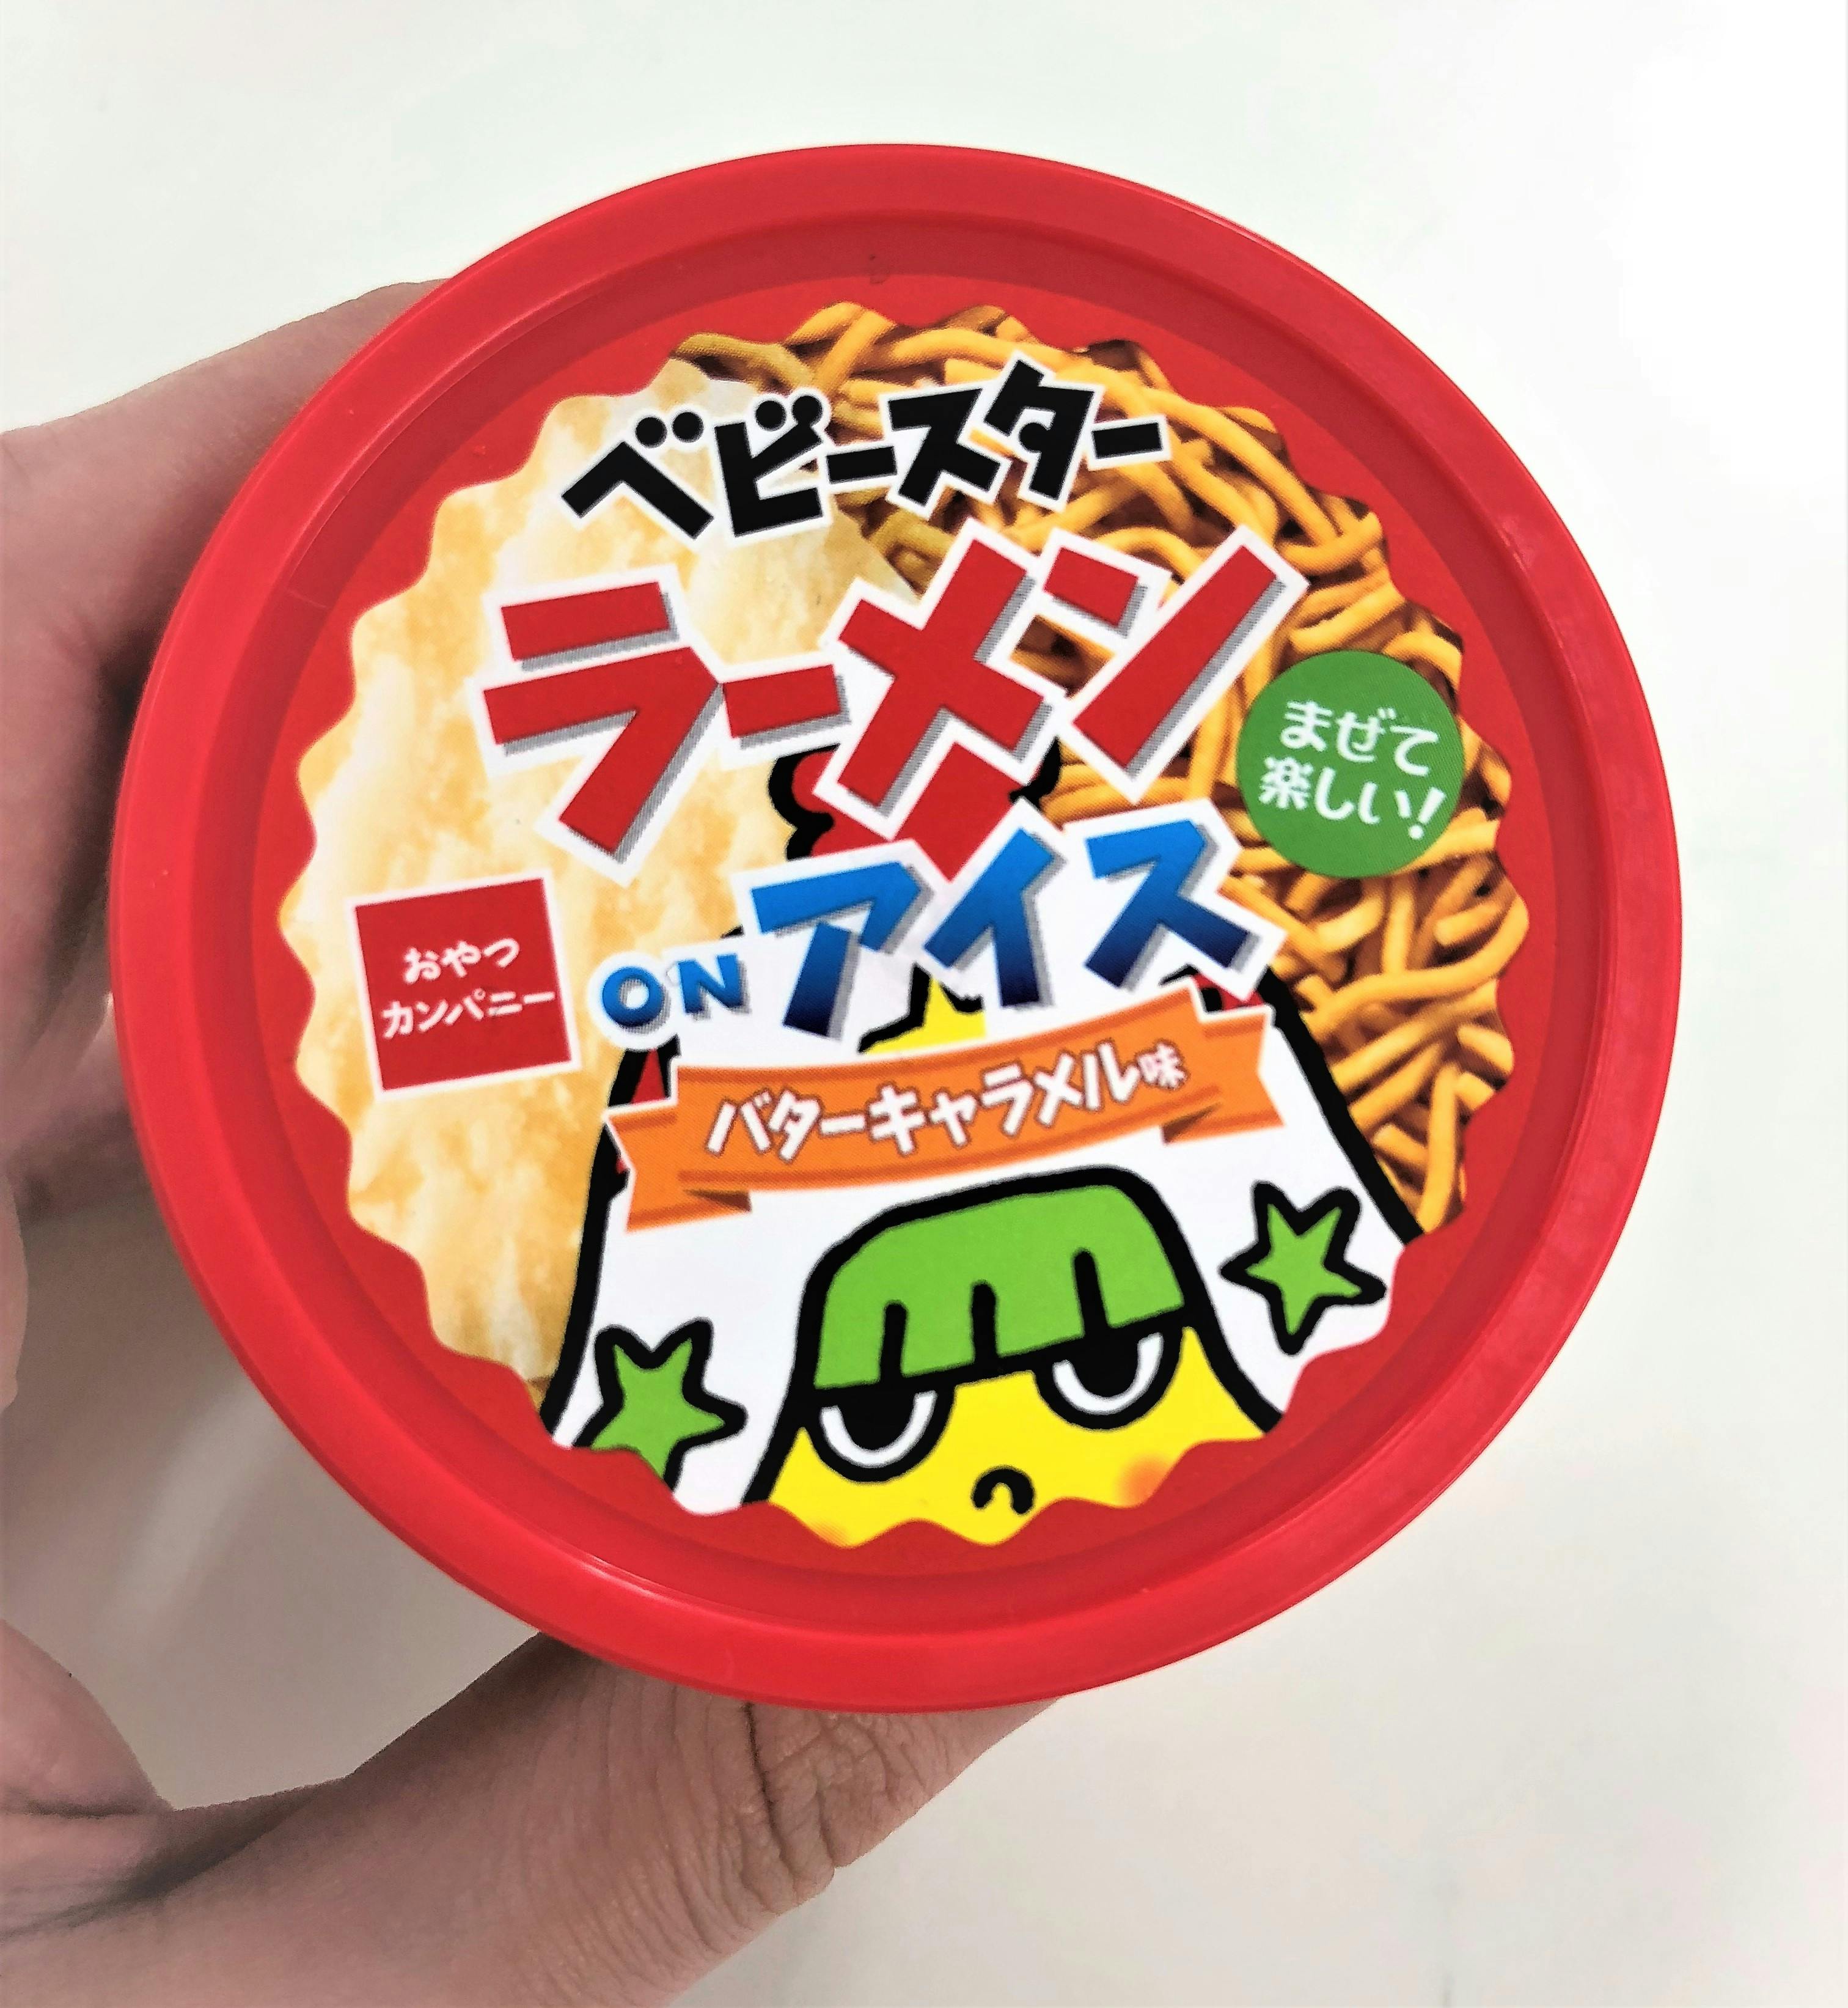 Tokyotreat Japan News Tokyotreat Japanese Candy Snacks Subscription Box Tokyo disneyland and disney sea have cancelled all special events across the two parks, stretching into march of 2021. japanese candy snacks subscription box